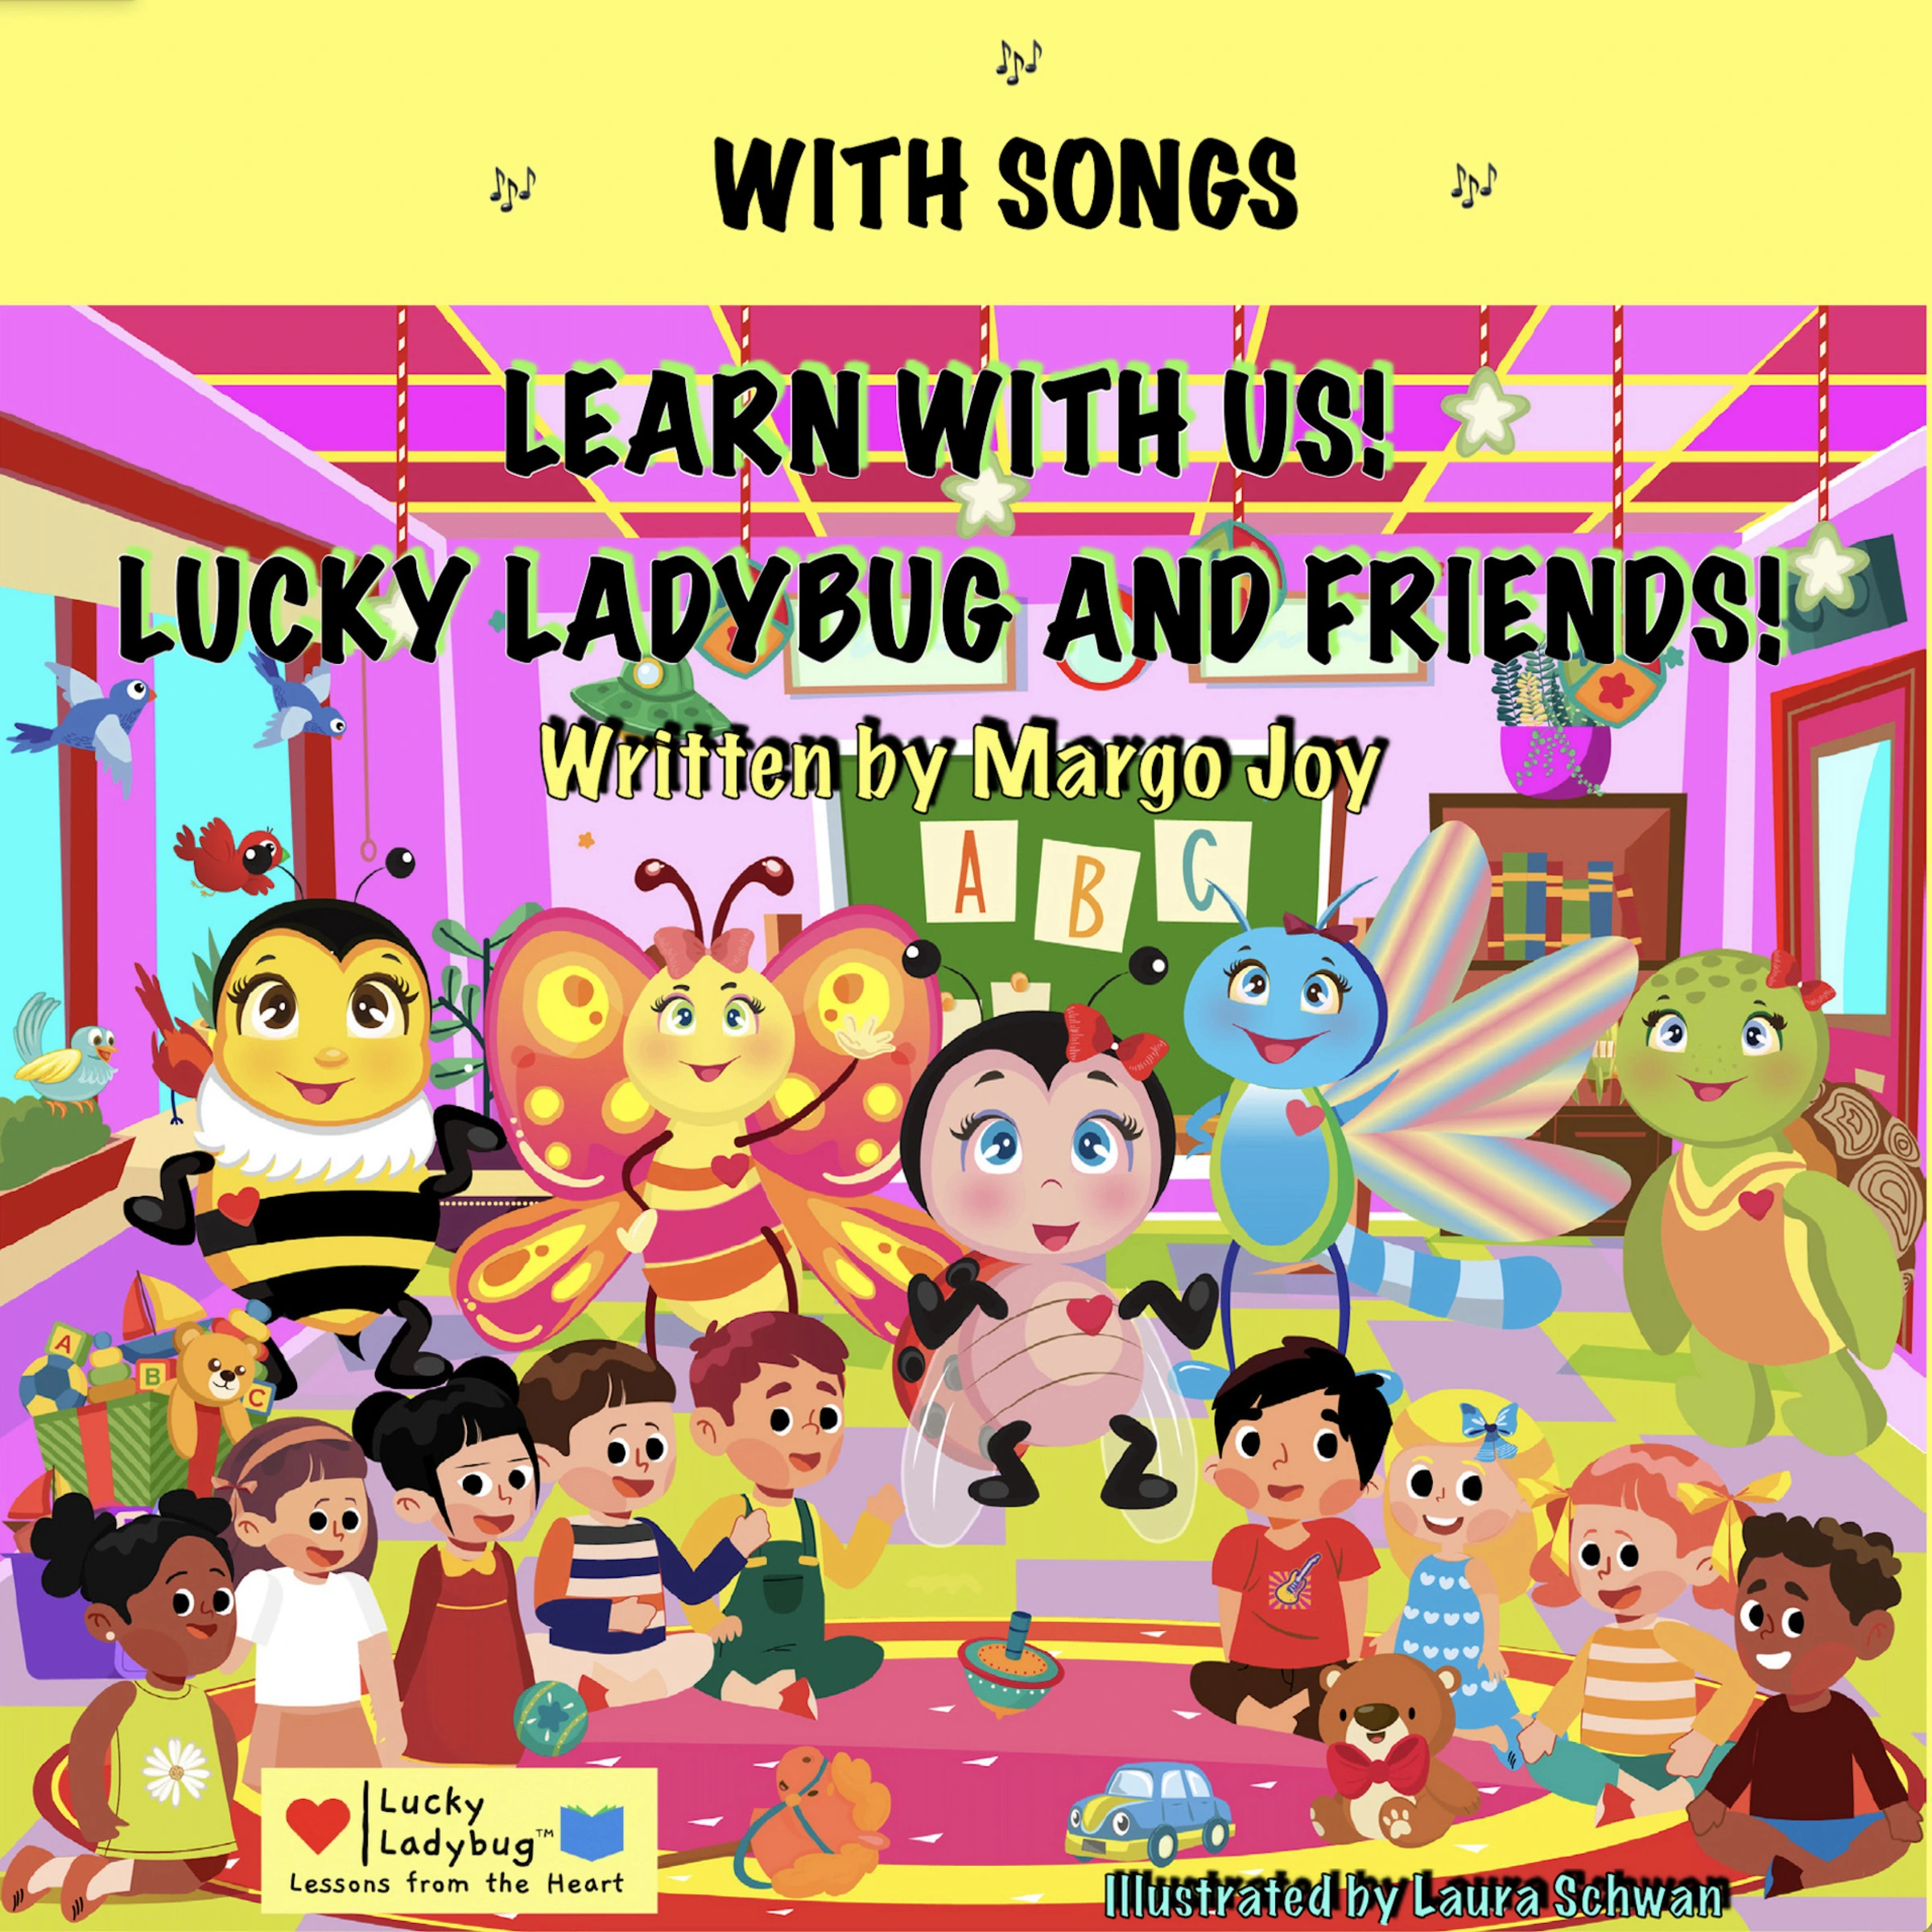 Learn With Us With Songs! Lucky Ladybug And Friends! by Margo Joy Audiobook